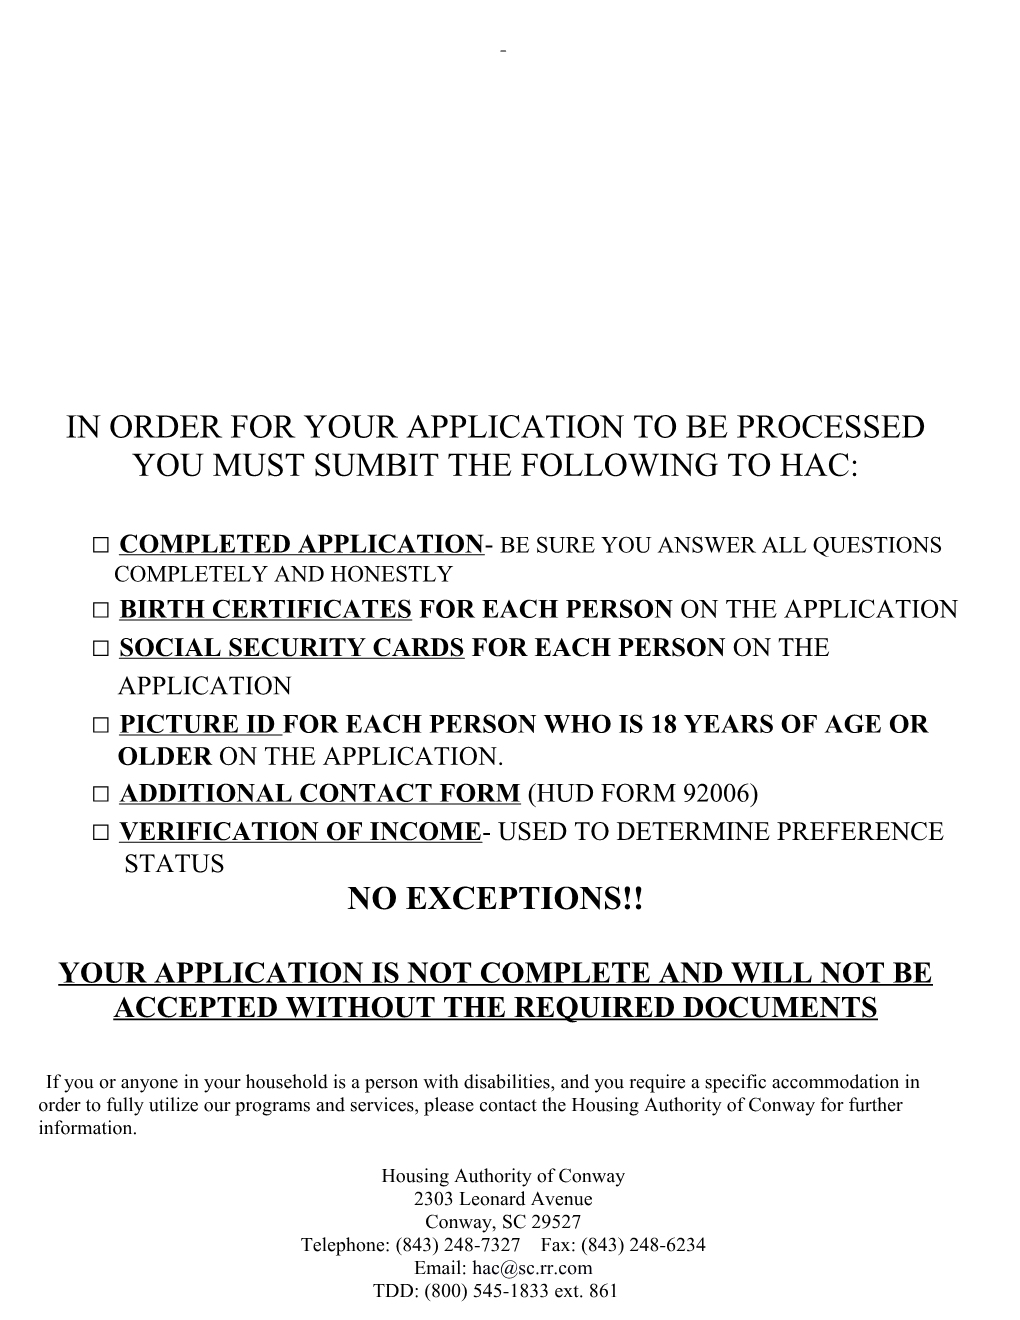 In Order for Your Application to Be Processed You Must Sumbit the Following to Hac